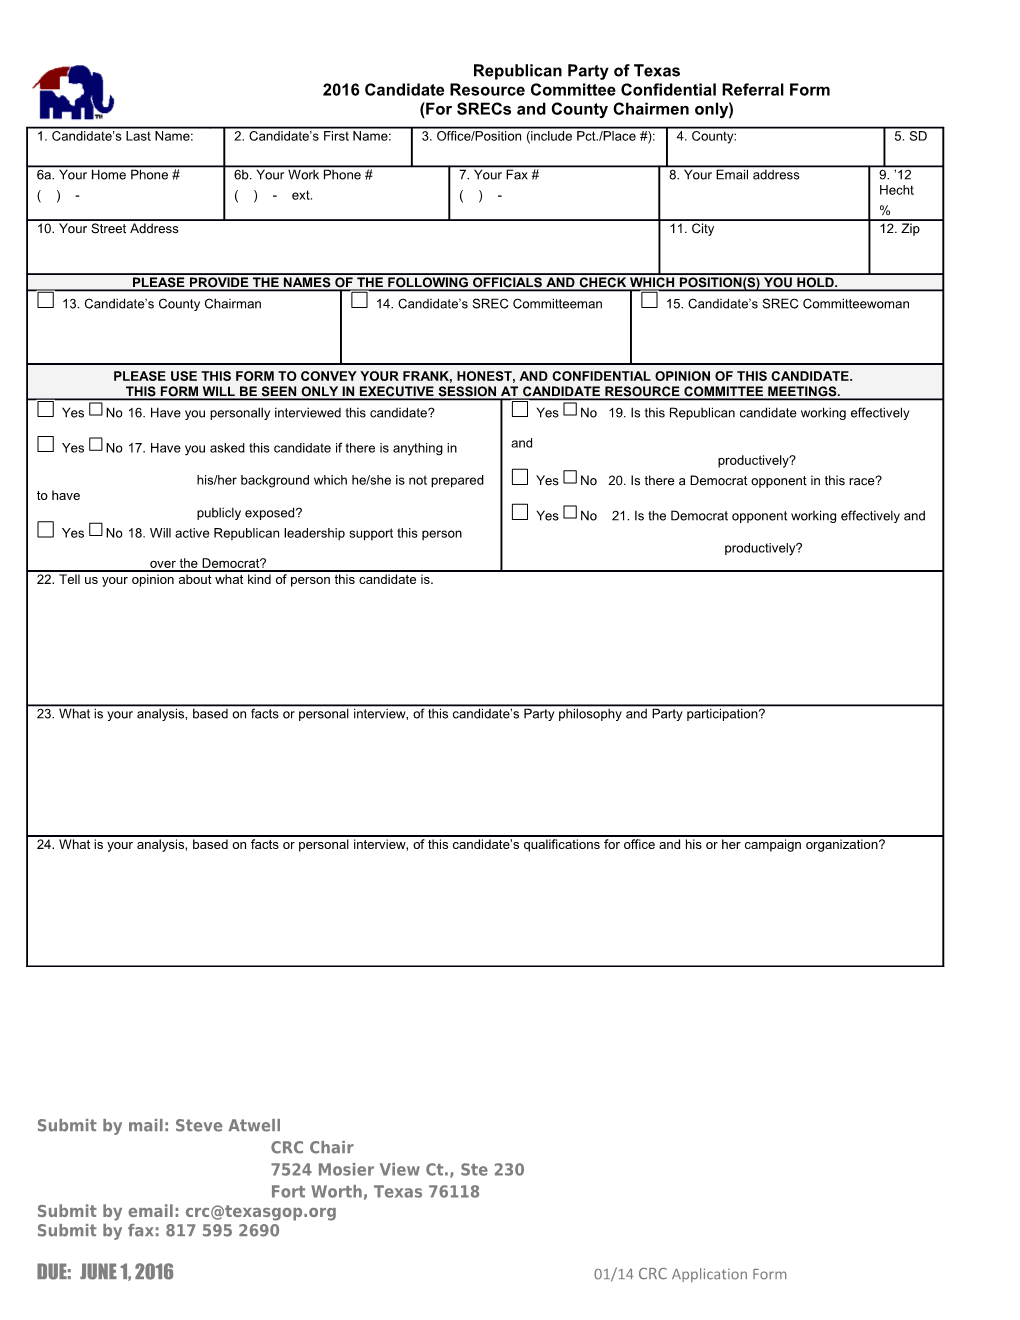 Form to Be Completed by SREC Or County Chair Only